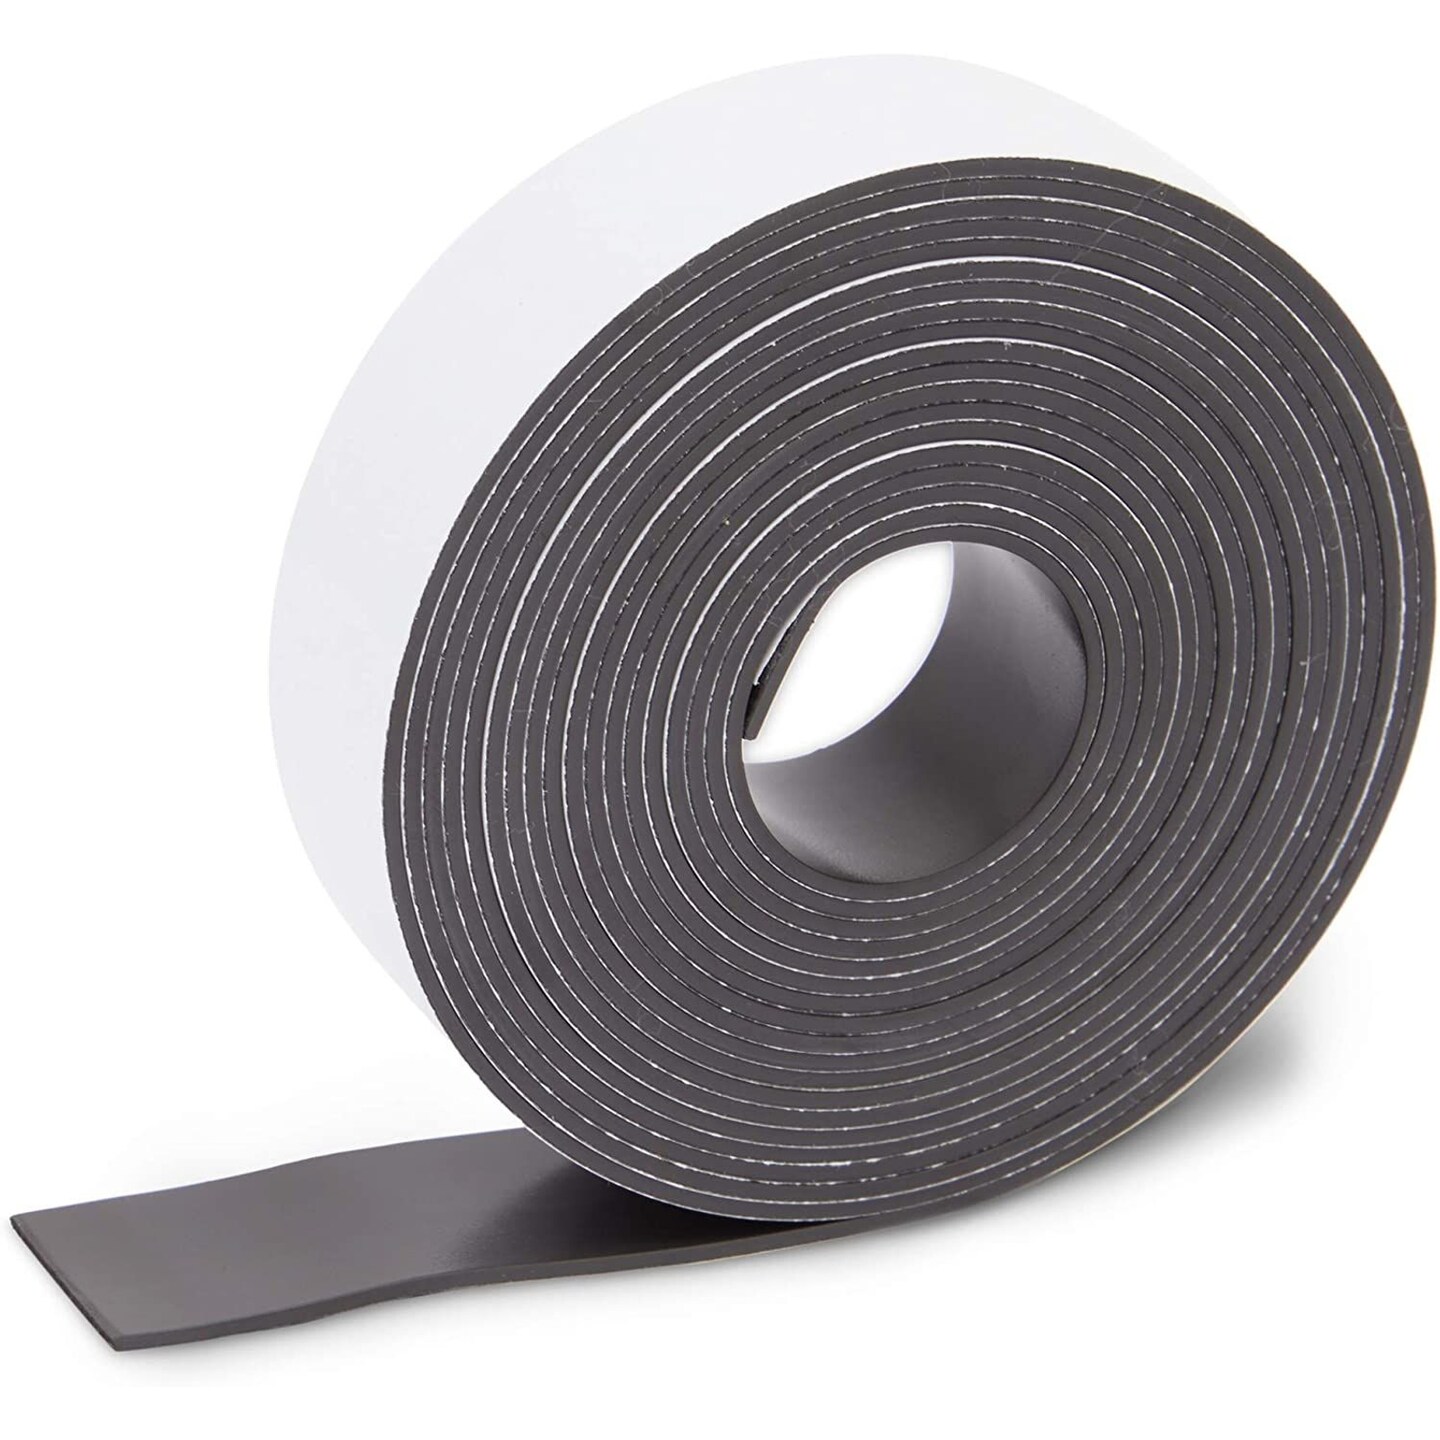 Monopolar Magnetic Tape Adhesive Magnetic Strips That Stick to